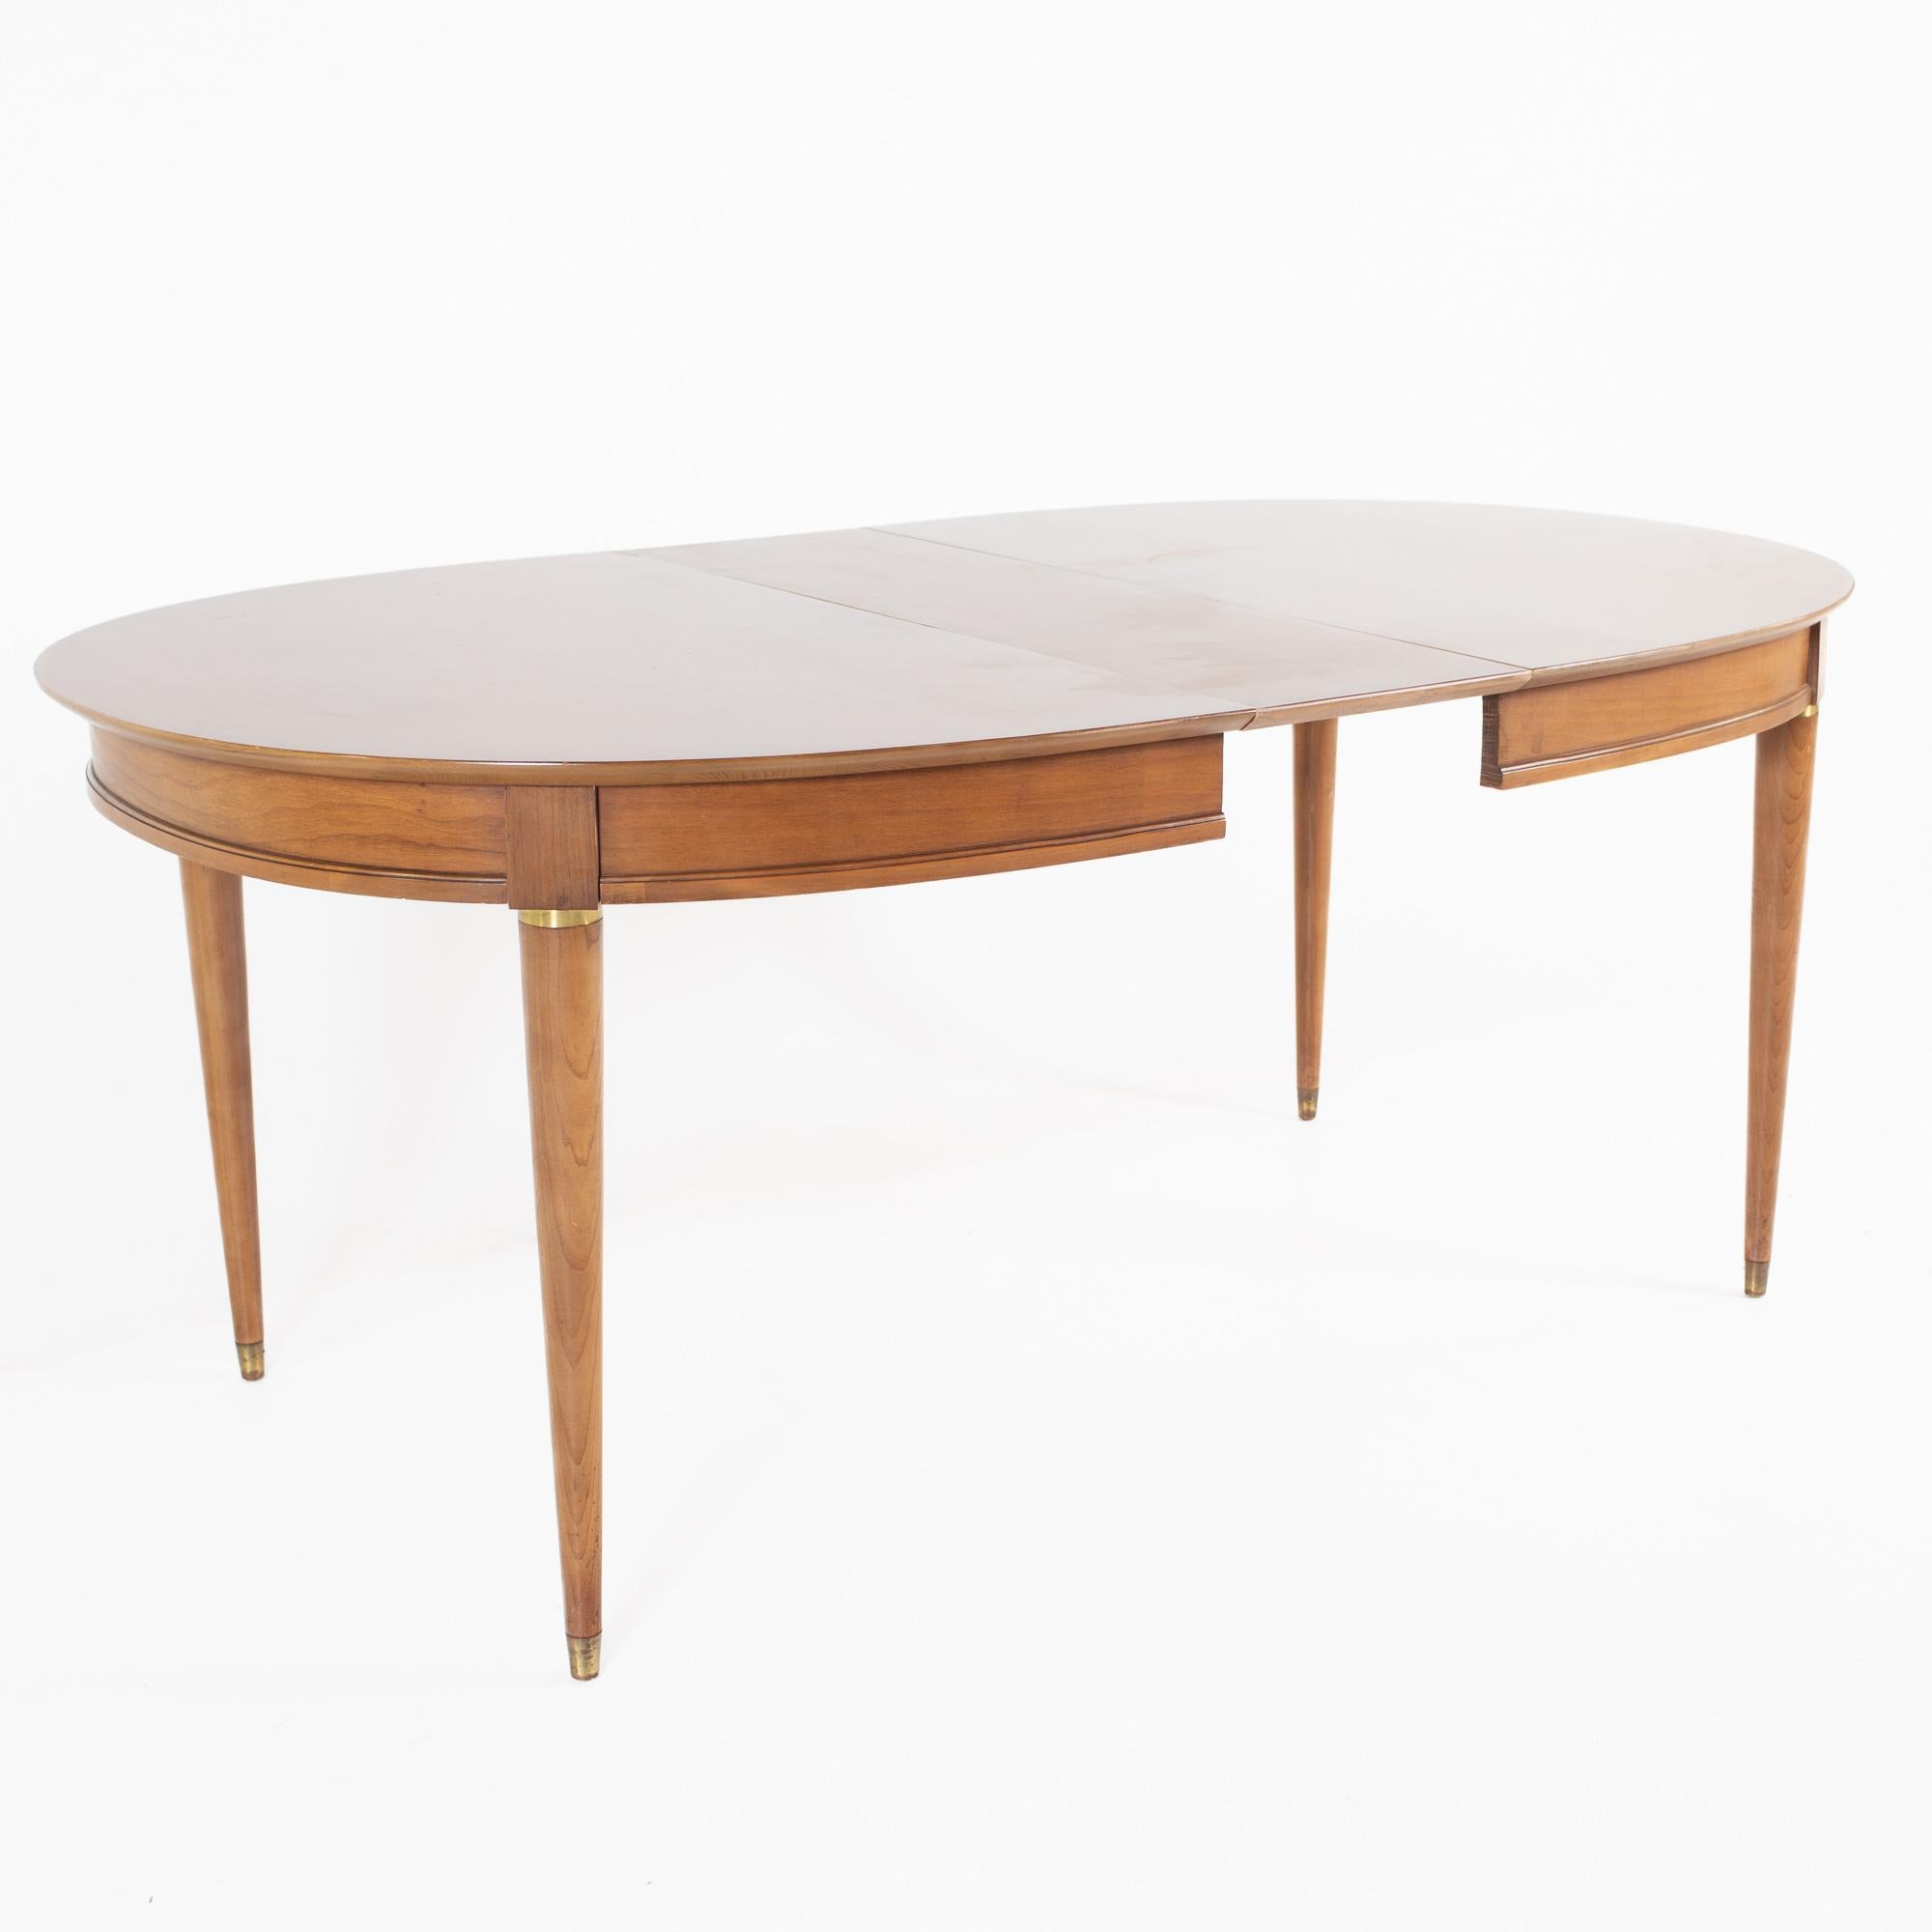 Late 20th Century Lane First Edition Cherry and Brass Expanding Dining Table with 3 Leaves For Sale